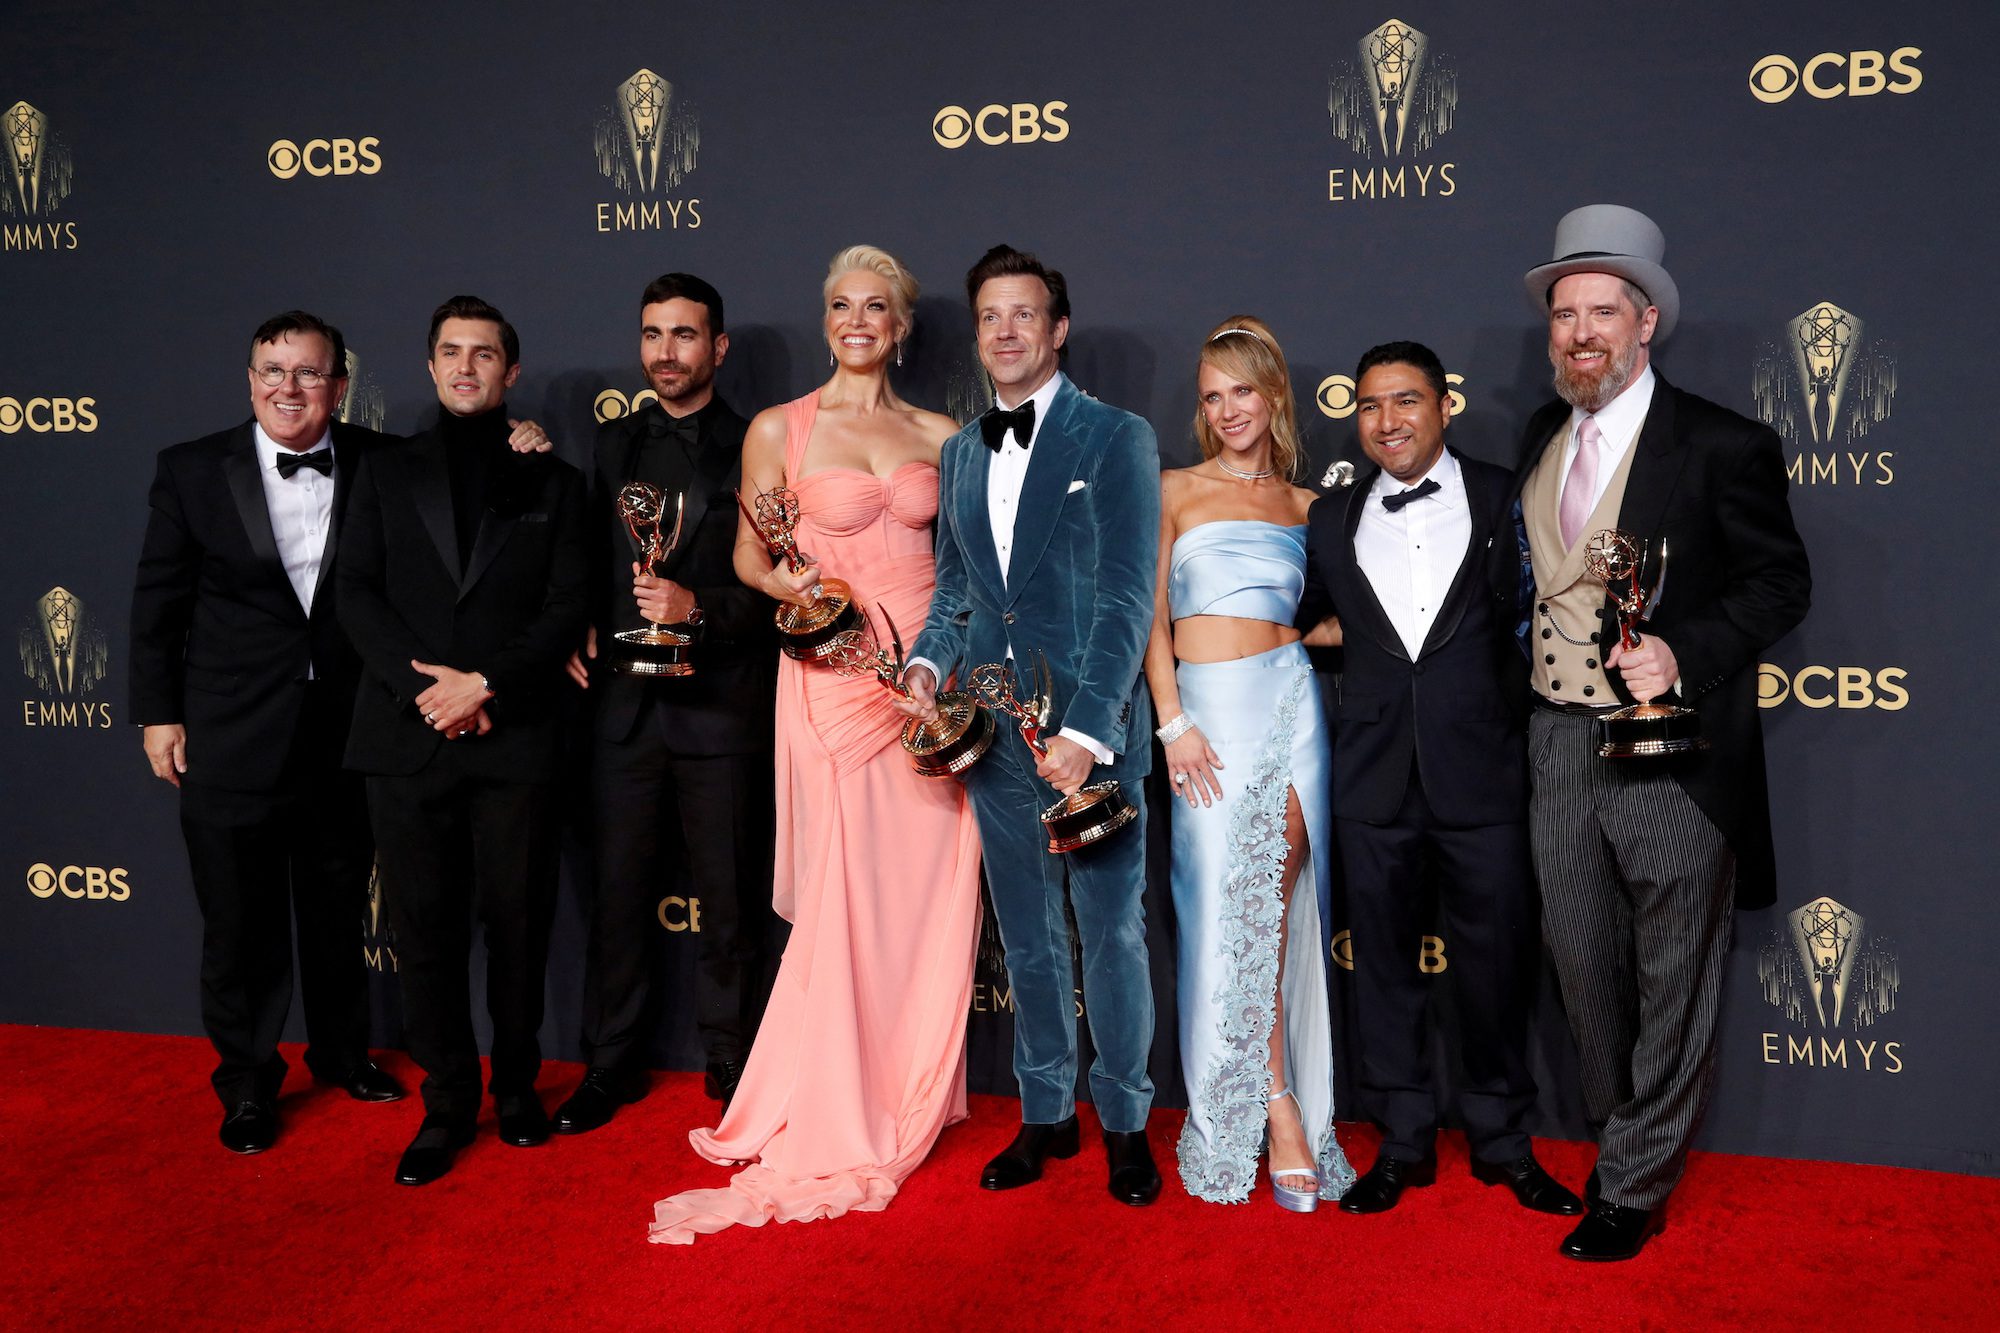 <em>Actors Jeremy Swift, Phil Dunster, Brett Goldstein, Hannah Waddingham, Jason Sudeikis, Juno Temple, Nick Mohammed and Brendan Hunt, cast members of "Ted Lasso", pose for a picture together at the 73rd Primetime Emmy Awards in Los Angeles, U.S., September 19, 2021. REUTERS/Mario Anzuoni</em>